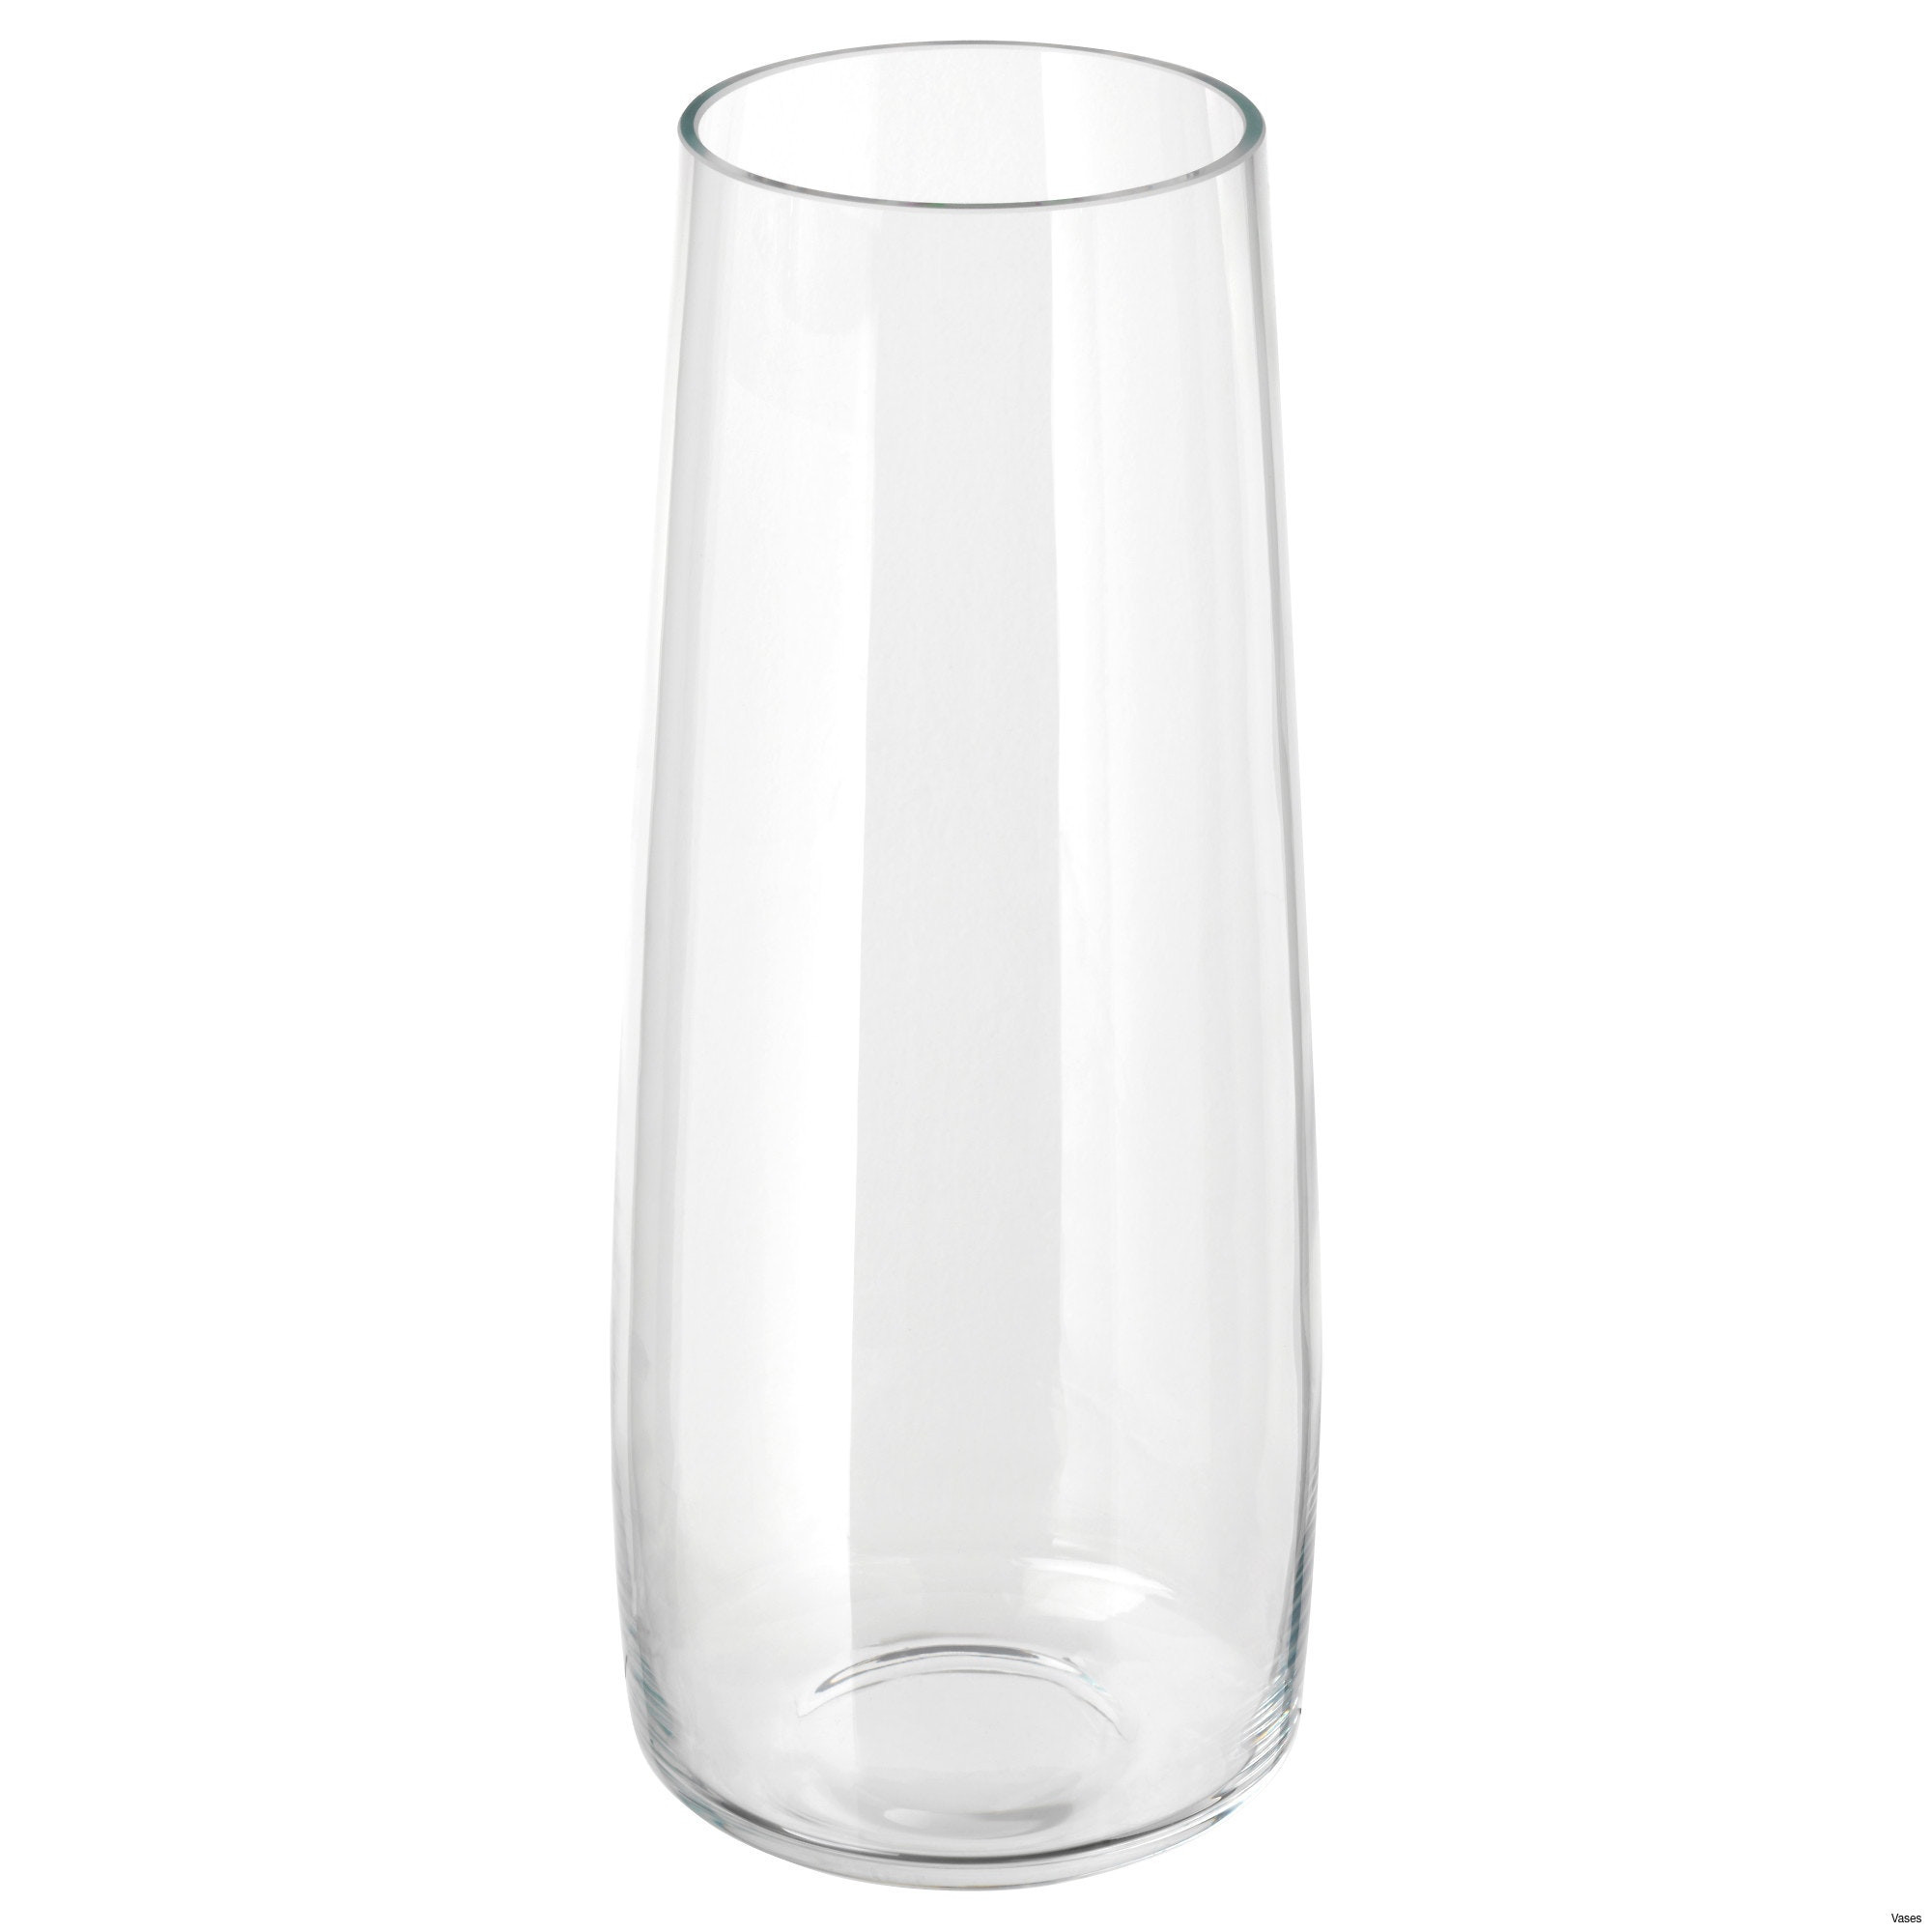 12 Nice 16 Glass Cylinder Vases wholesale 2024 free download 16 glass cylinder vases wholesale of round glass vases pictures vases bubble ball discount 15 vase round with regard to round glass vases photograph clear glass planters fresh clear glass va